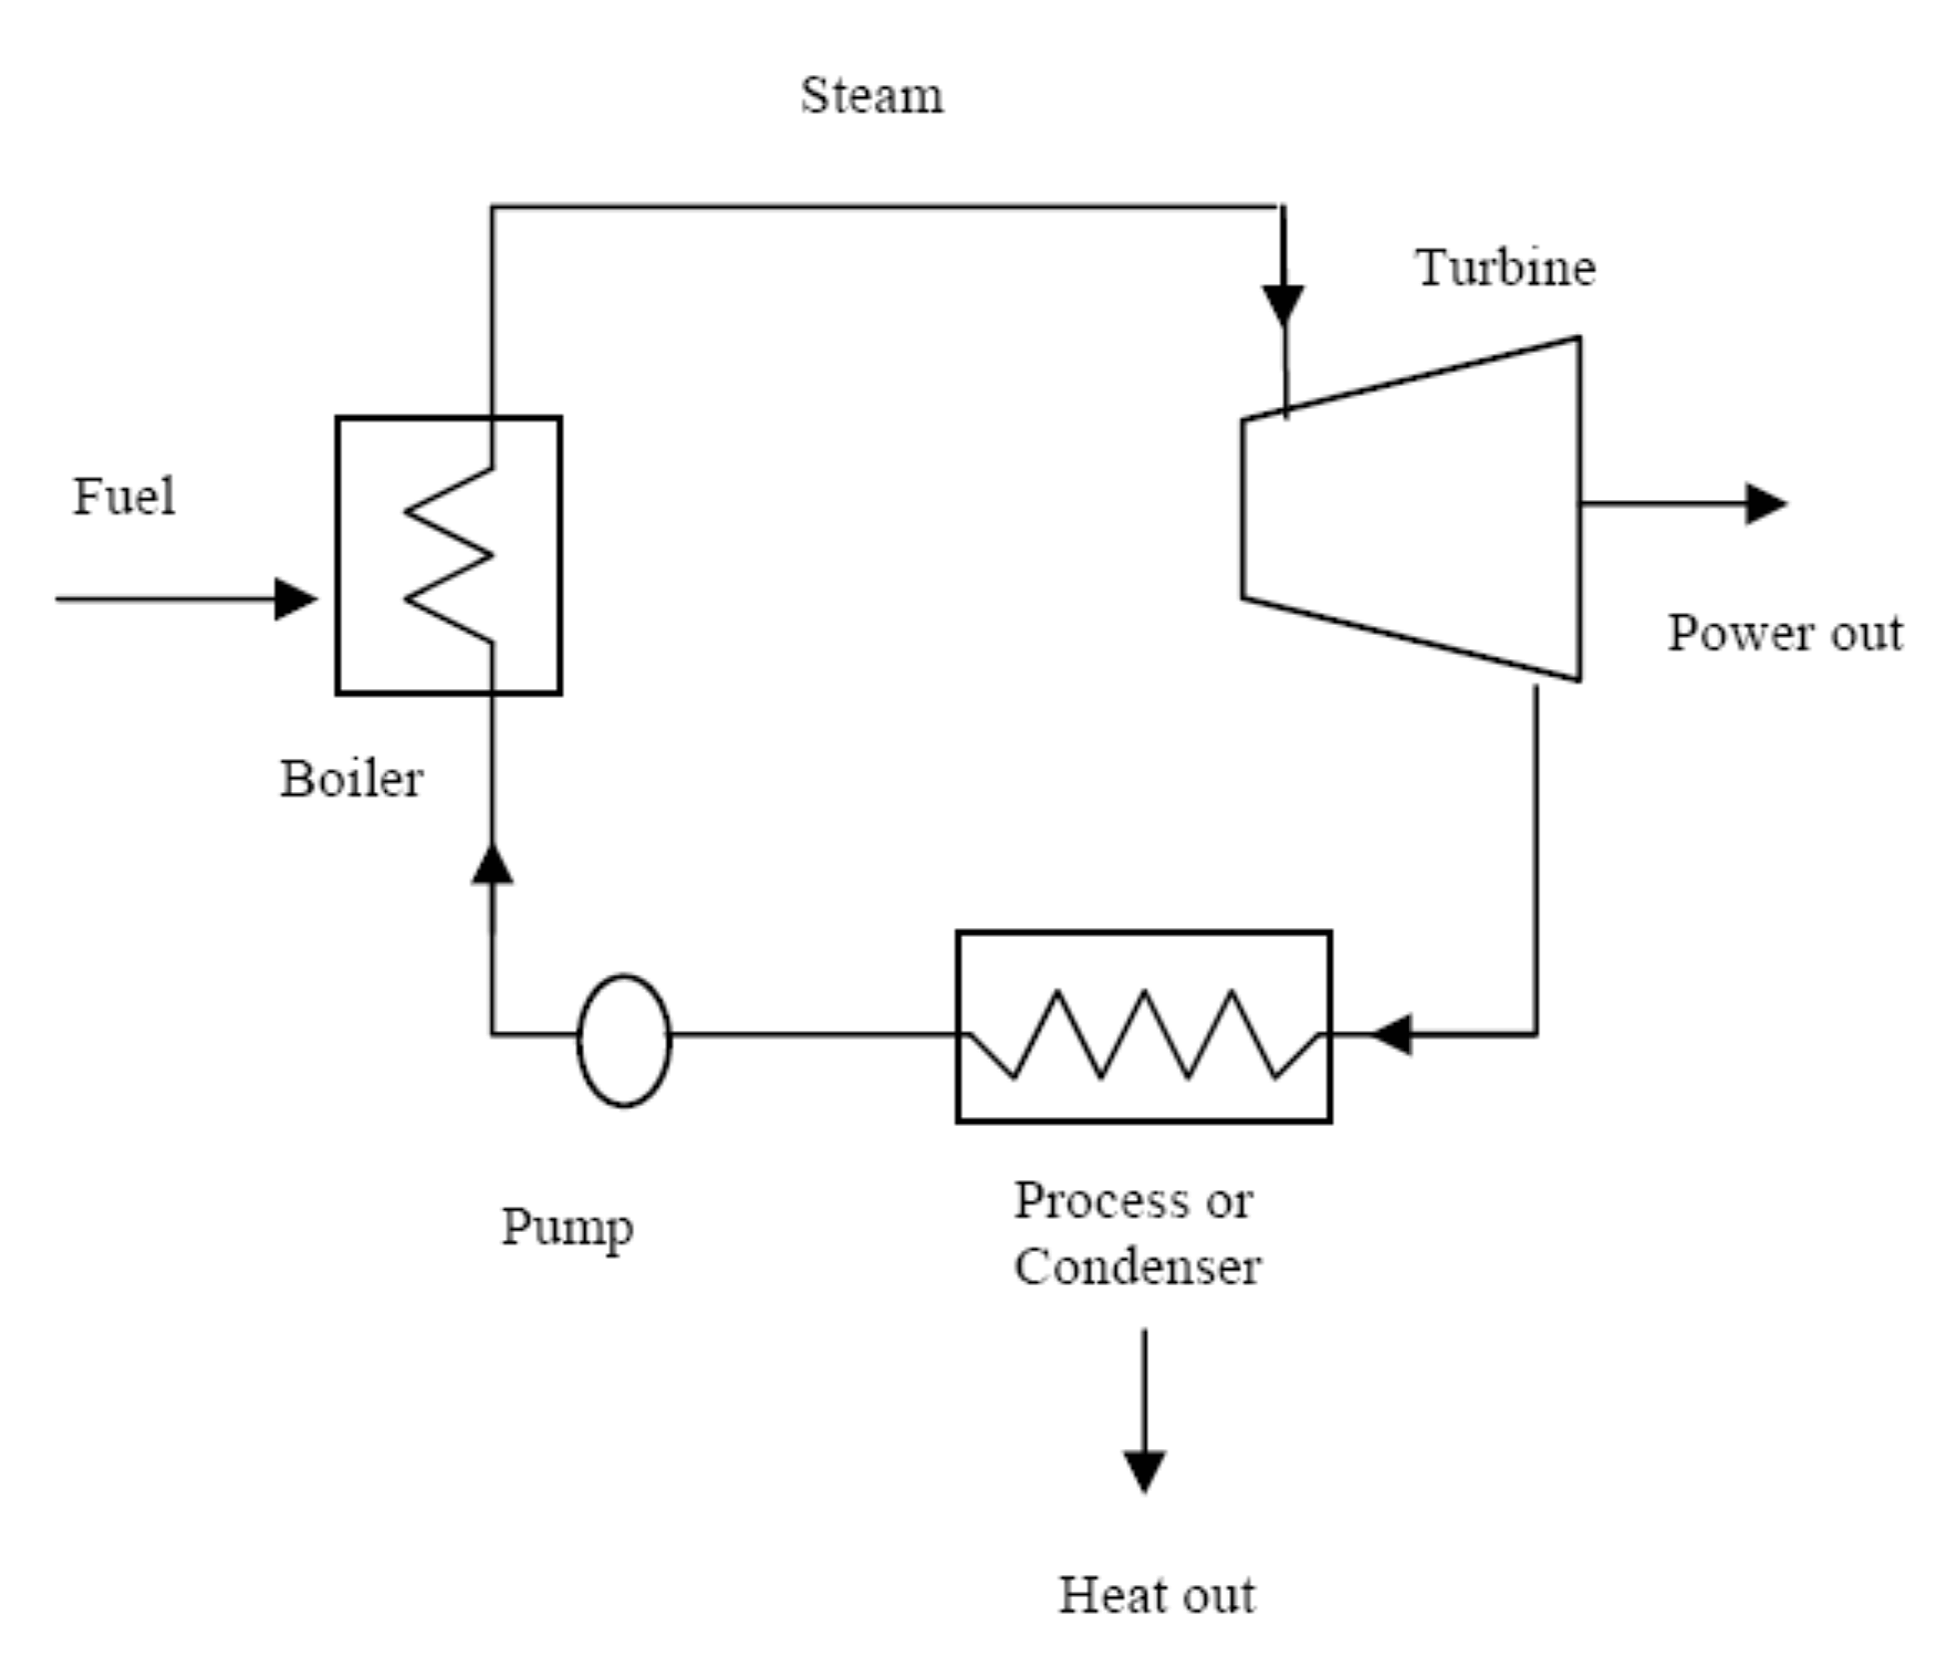 graphic: fuel, boiler, pump, steam, process or condenser, heat out, turbine, power out